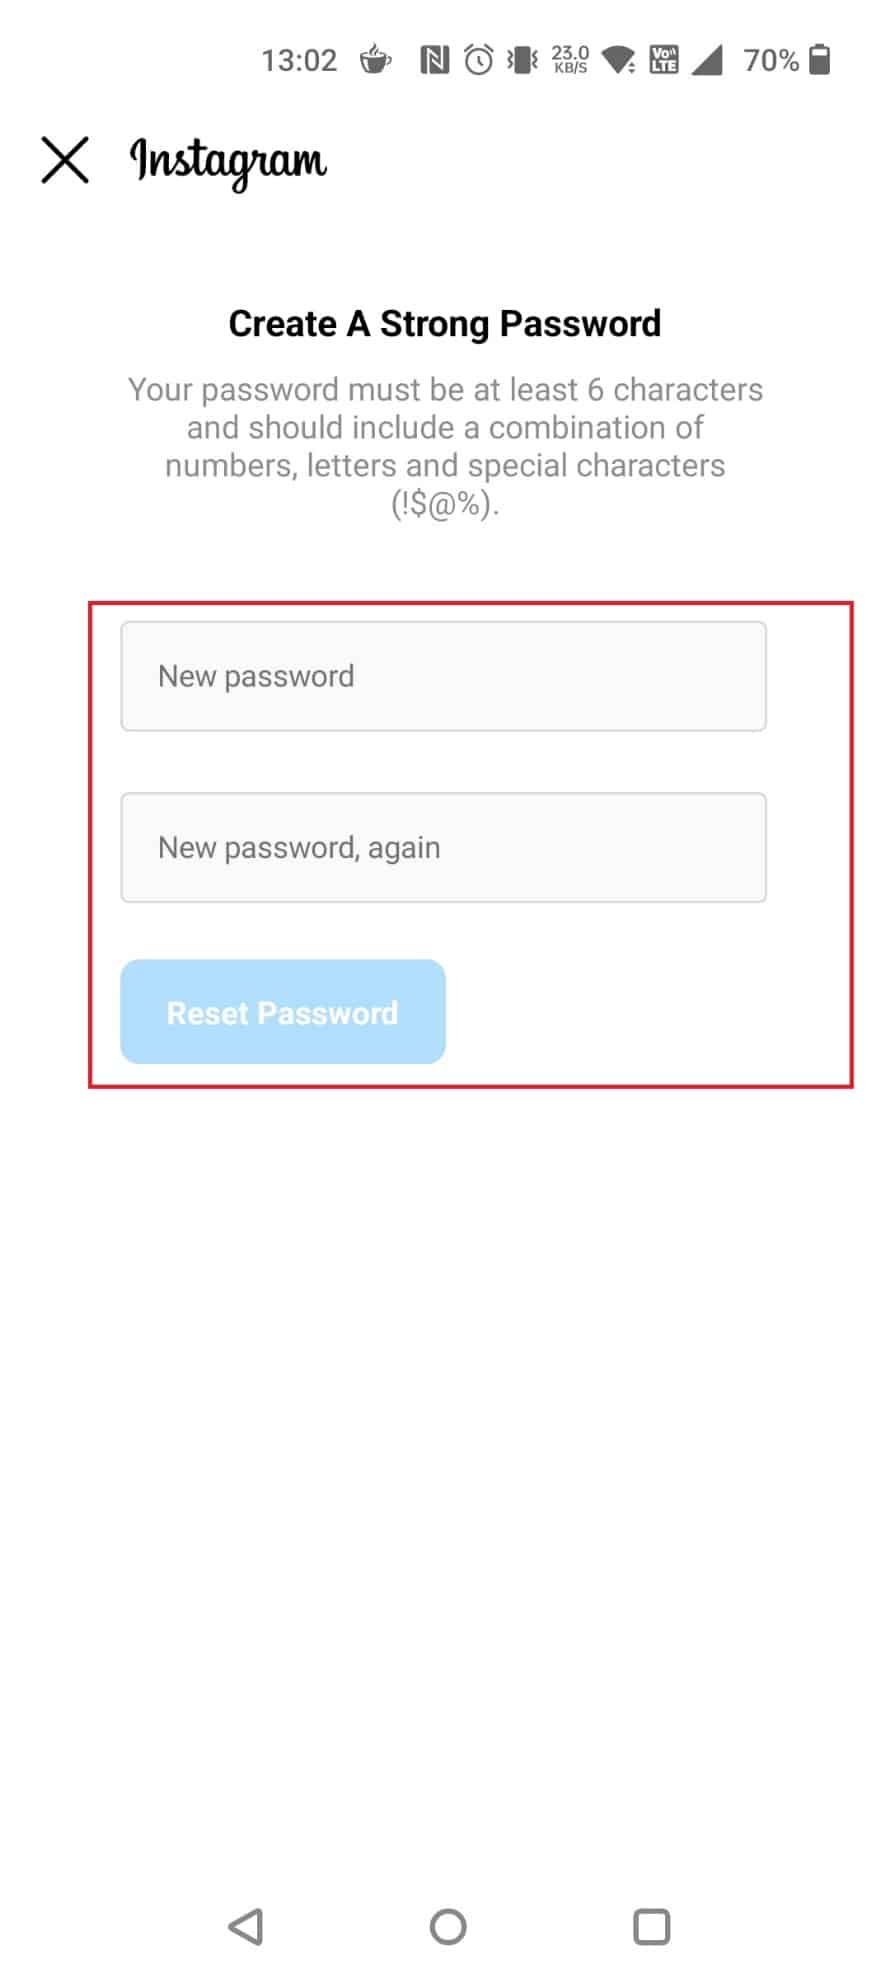 Enter and re-enter a new password. Tap on Reset Password